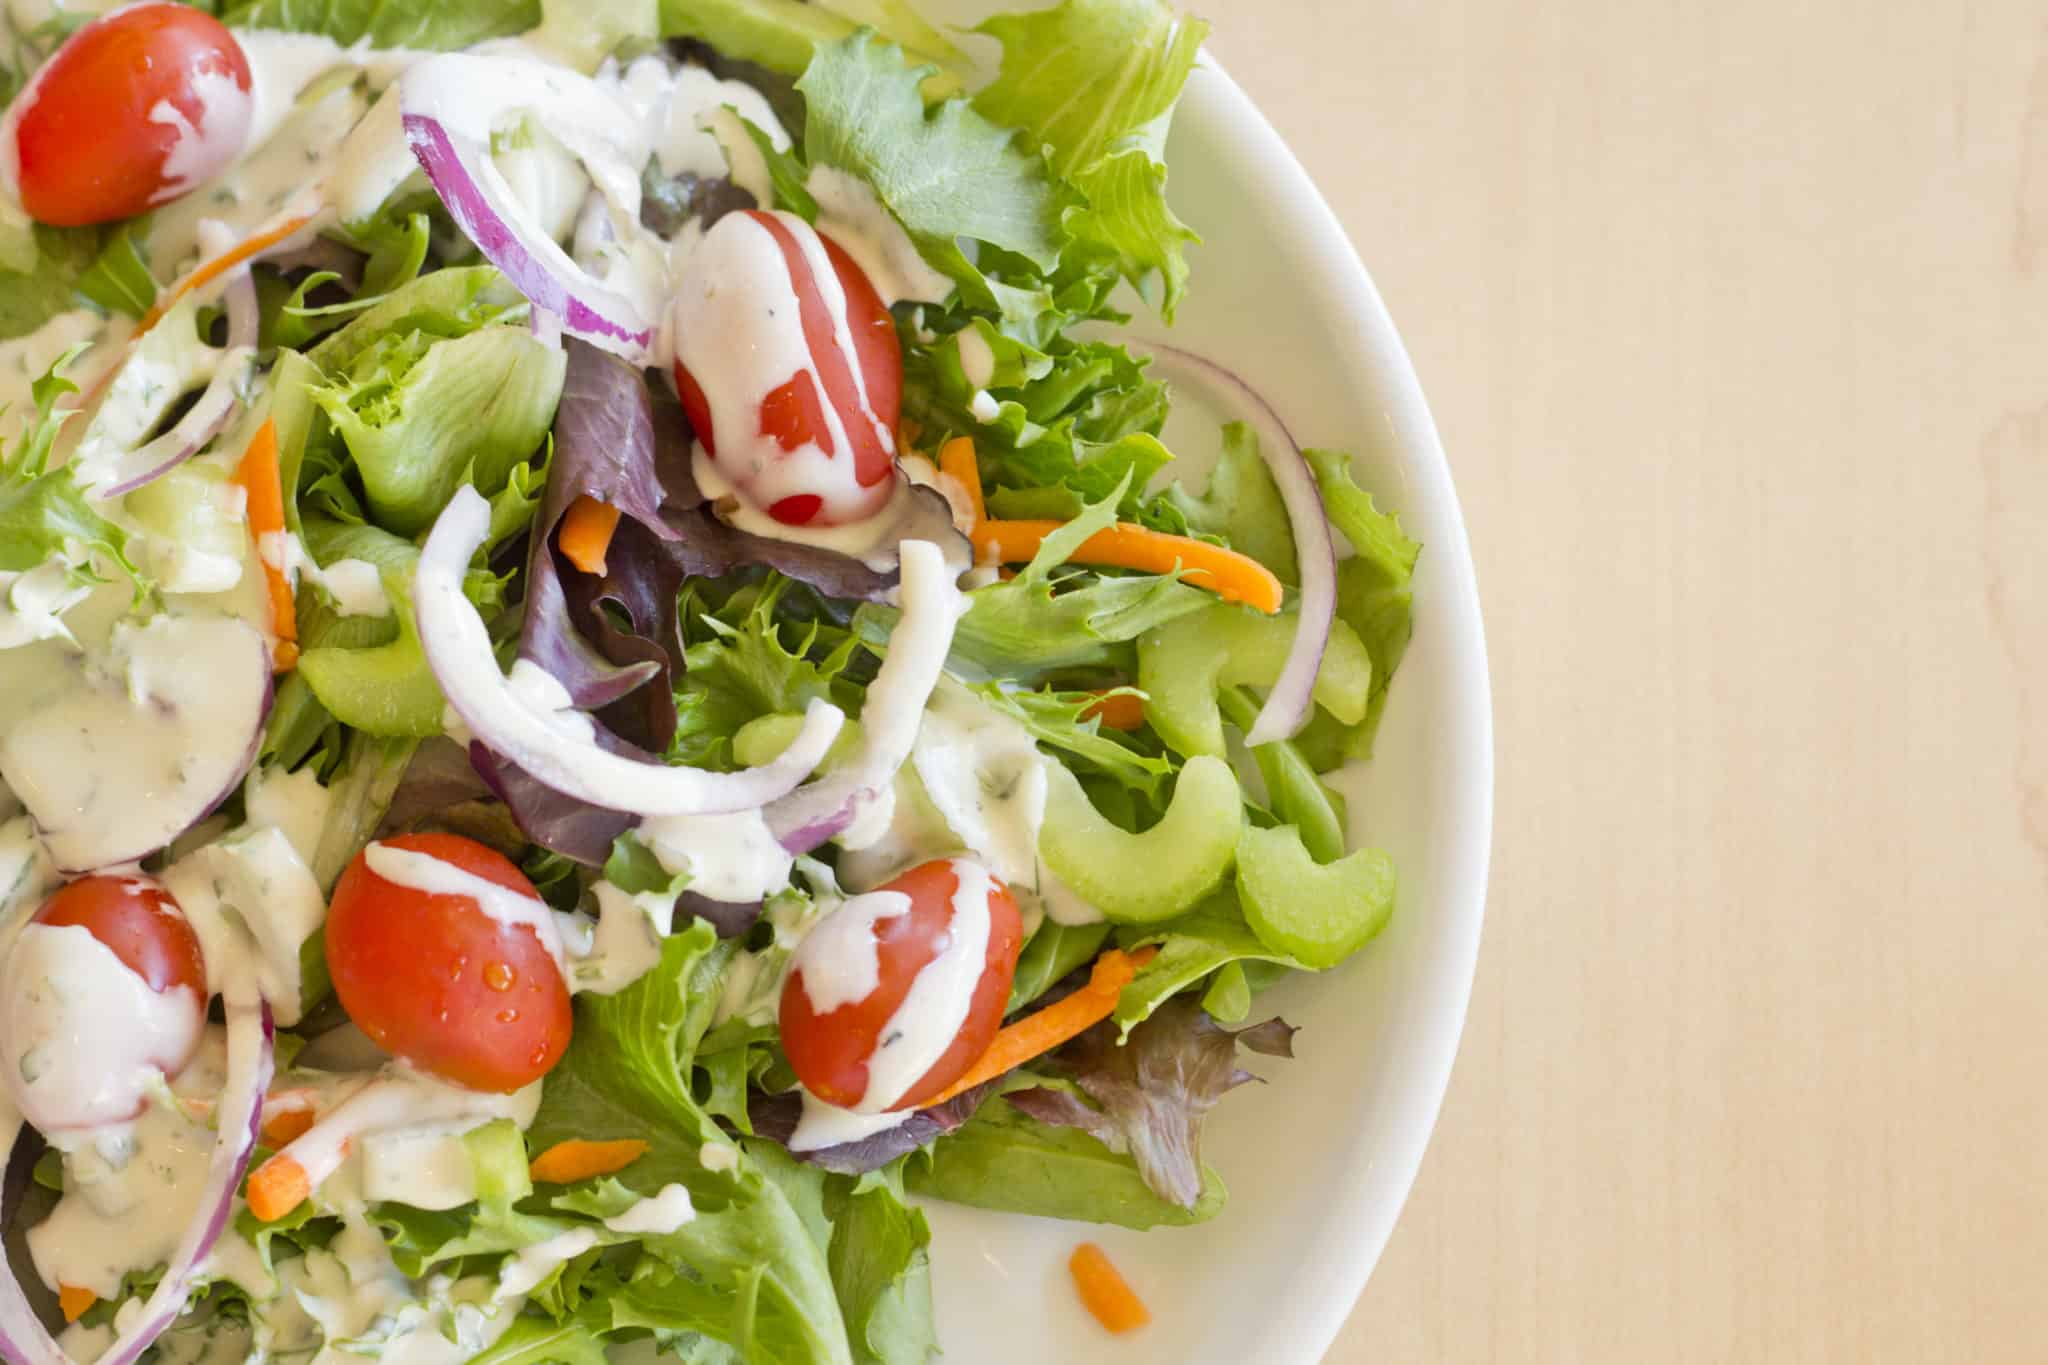 Think all salads are automatically healthy? Well, not always: these 7 mistakes can turn your salad from healthy to calorie bombs.